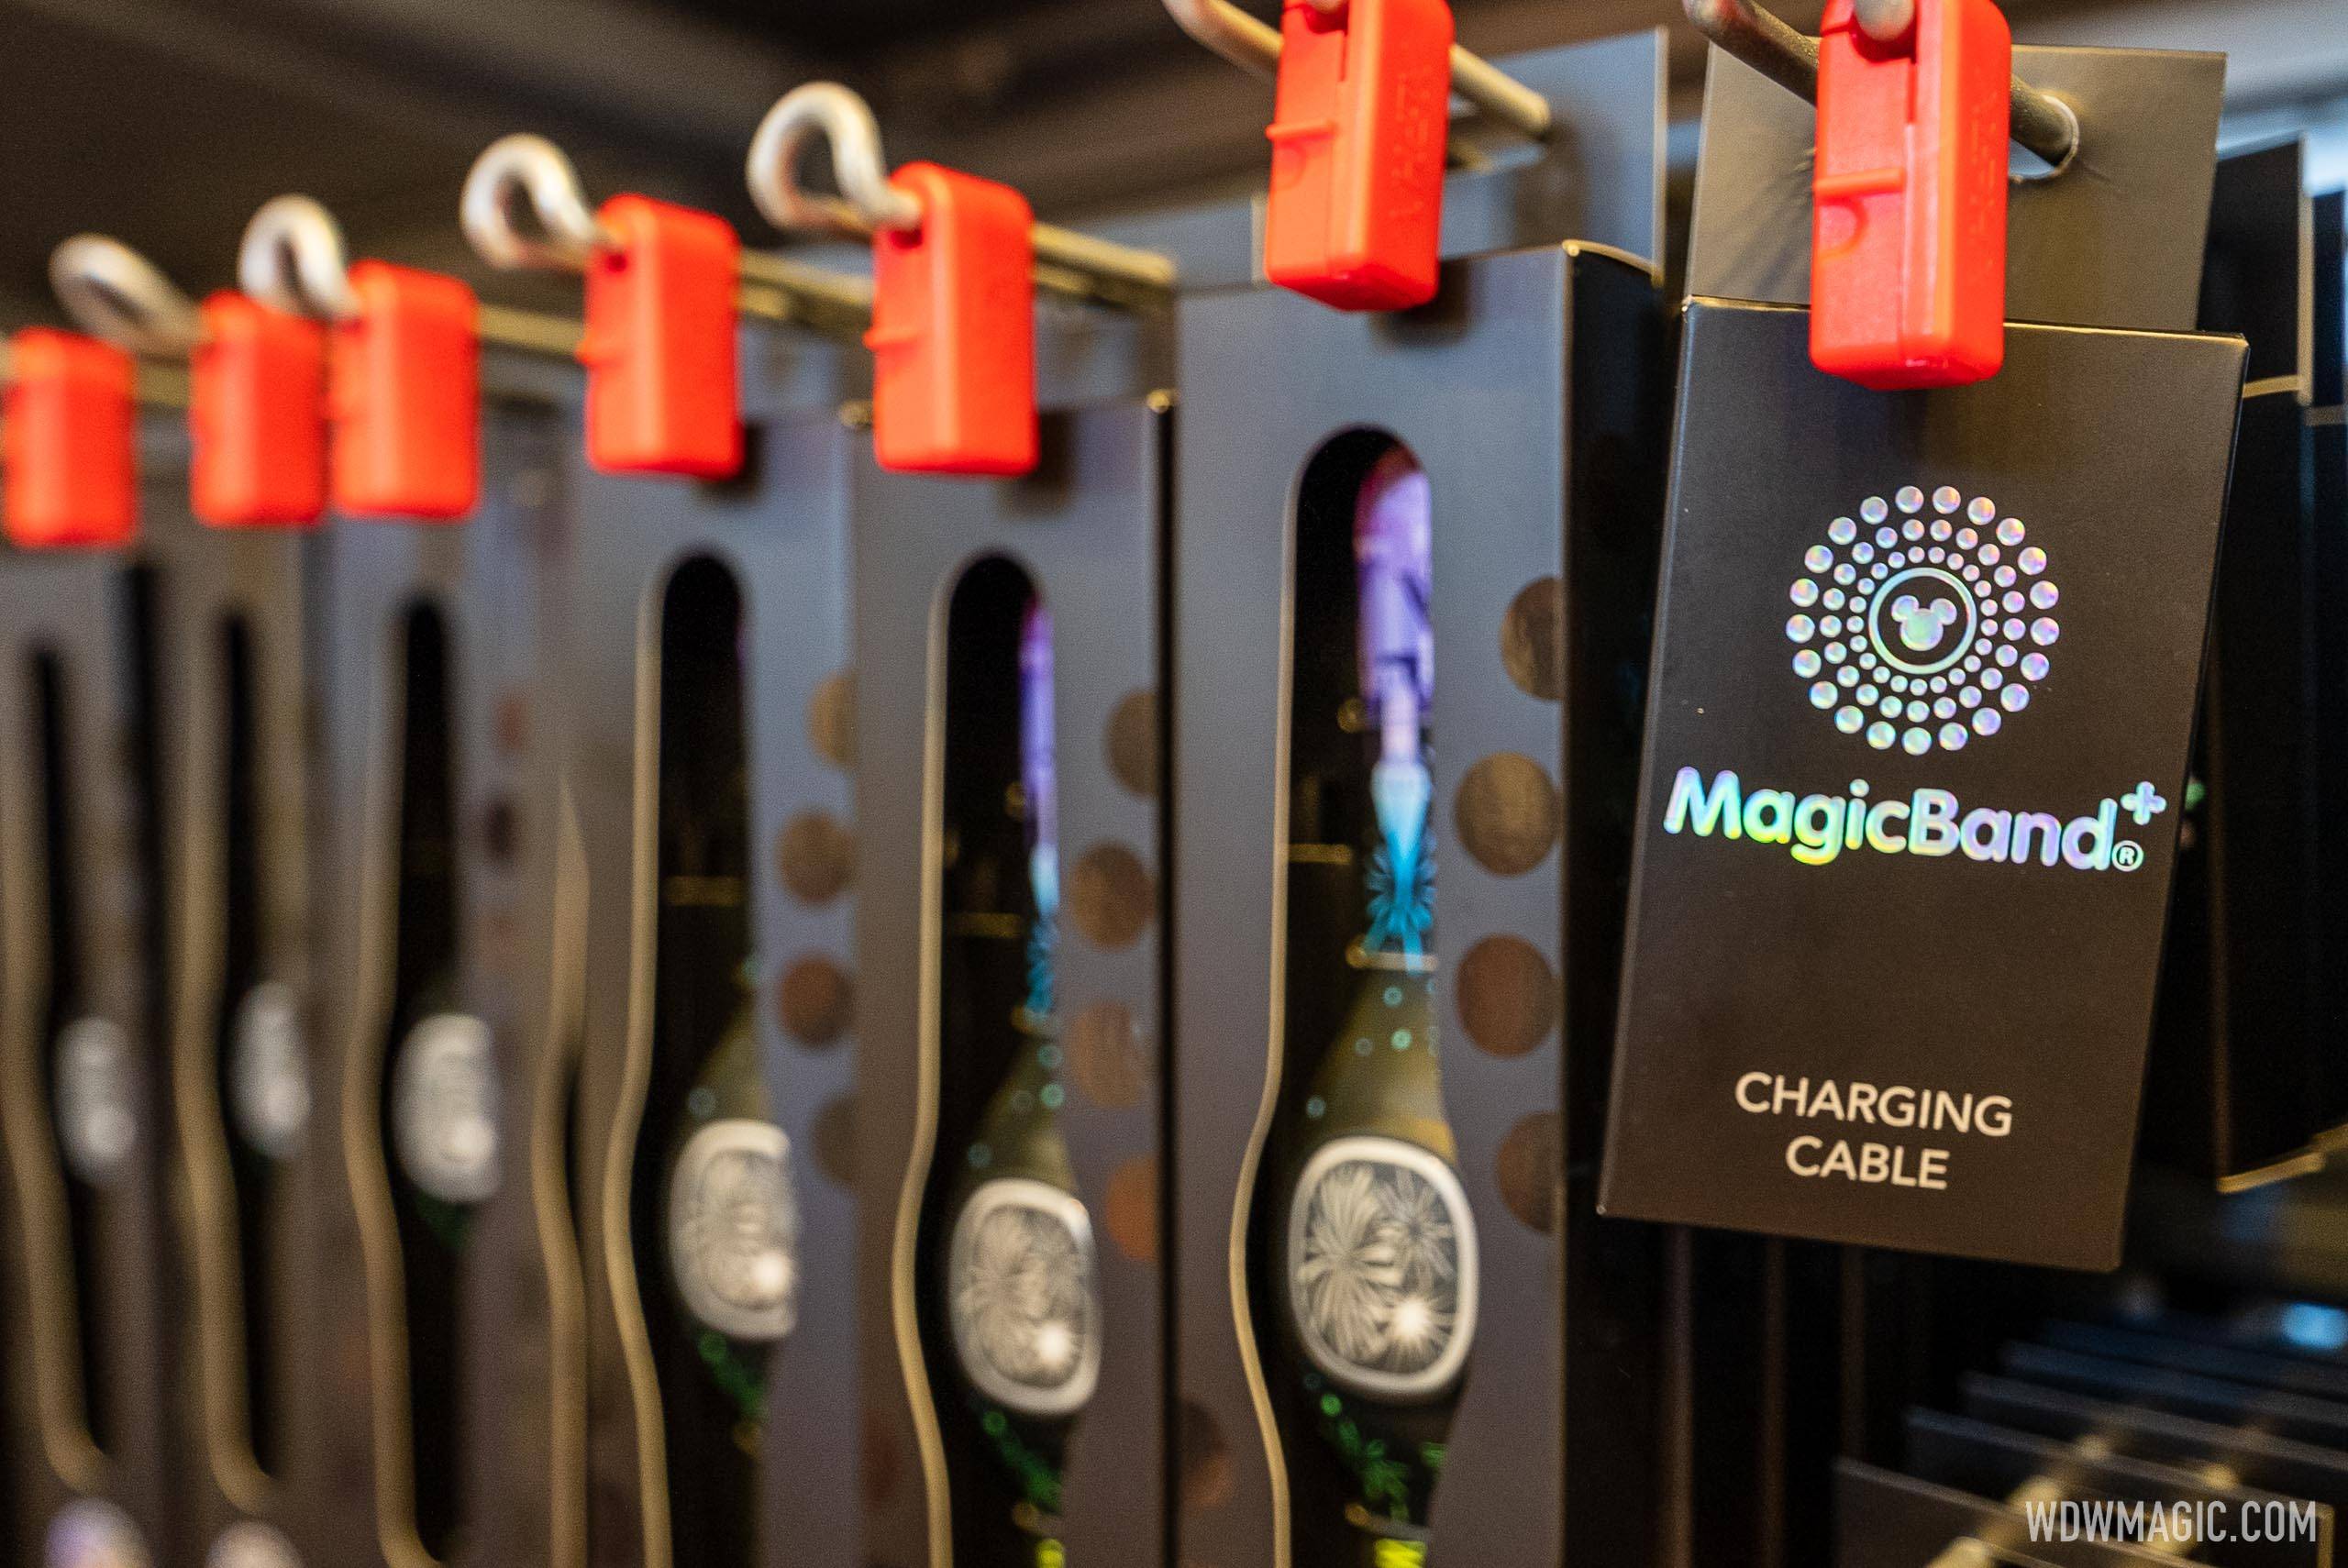 MagicBand+ charging cable is now available for purchase at Walt Disney World